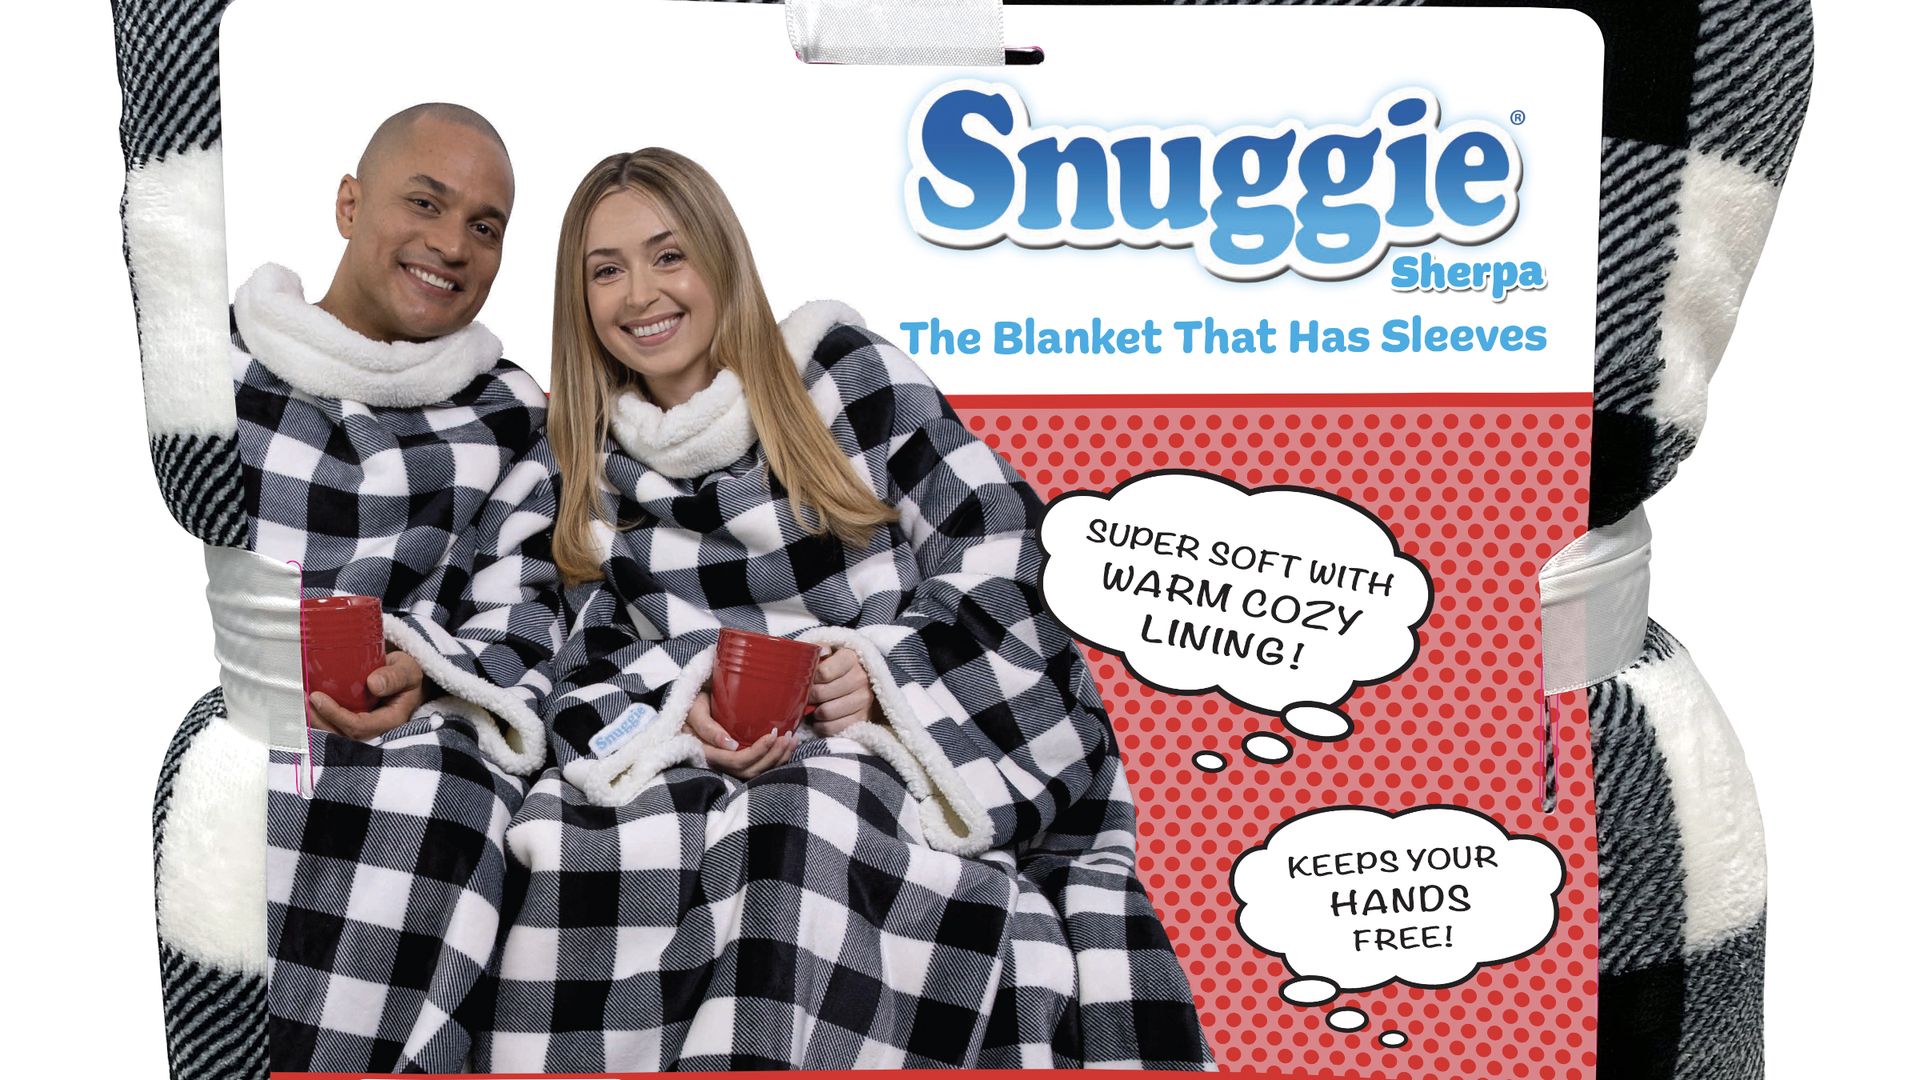 A black, white and gray plaid blanket, with a Snuggie label which features a photo of a couple wearing the product.